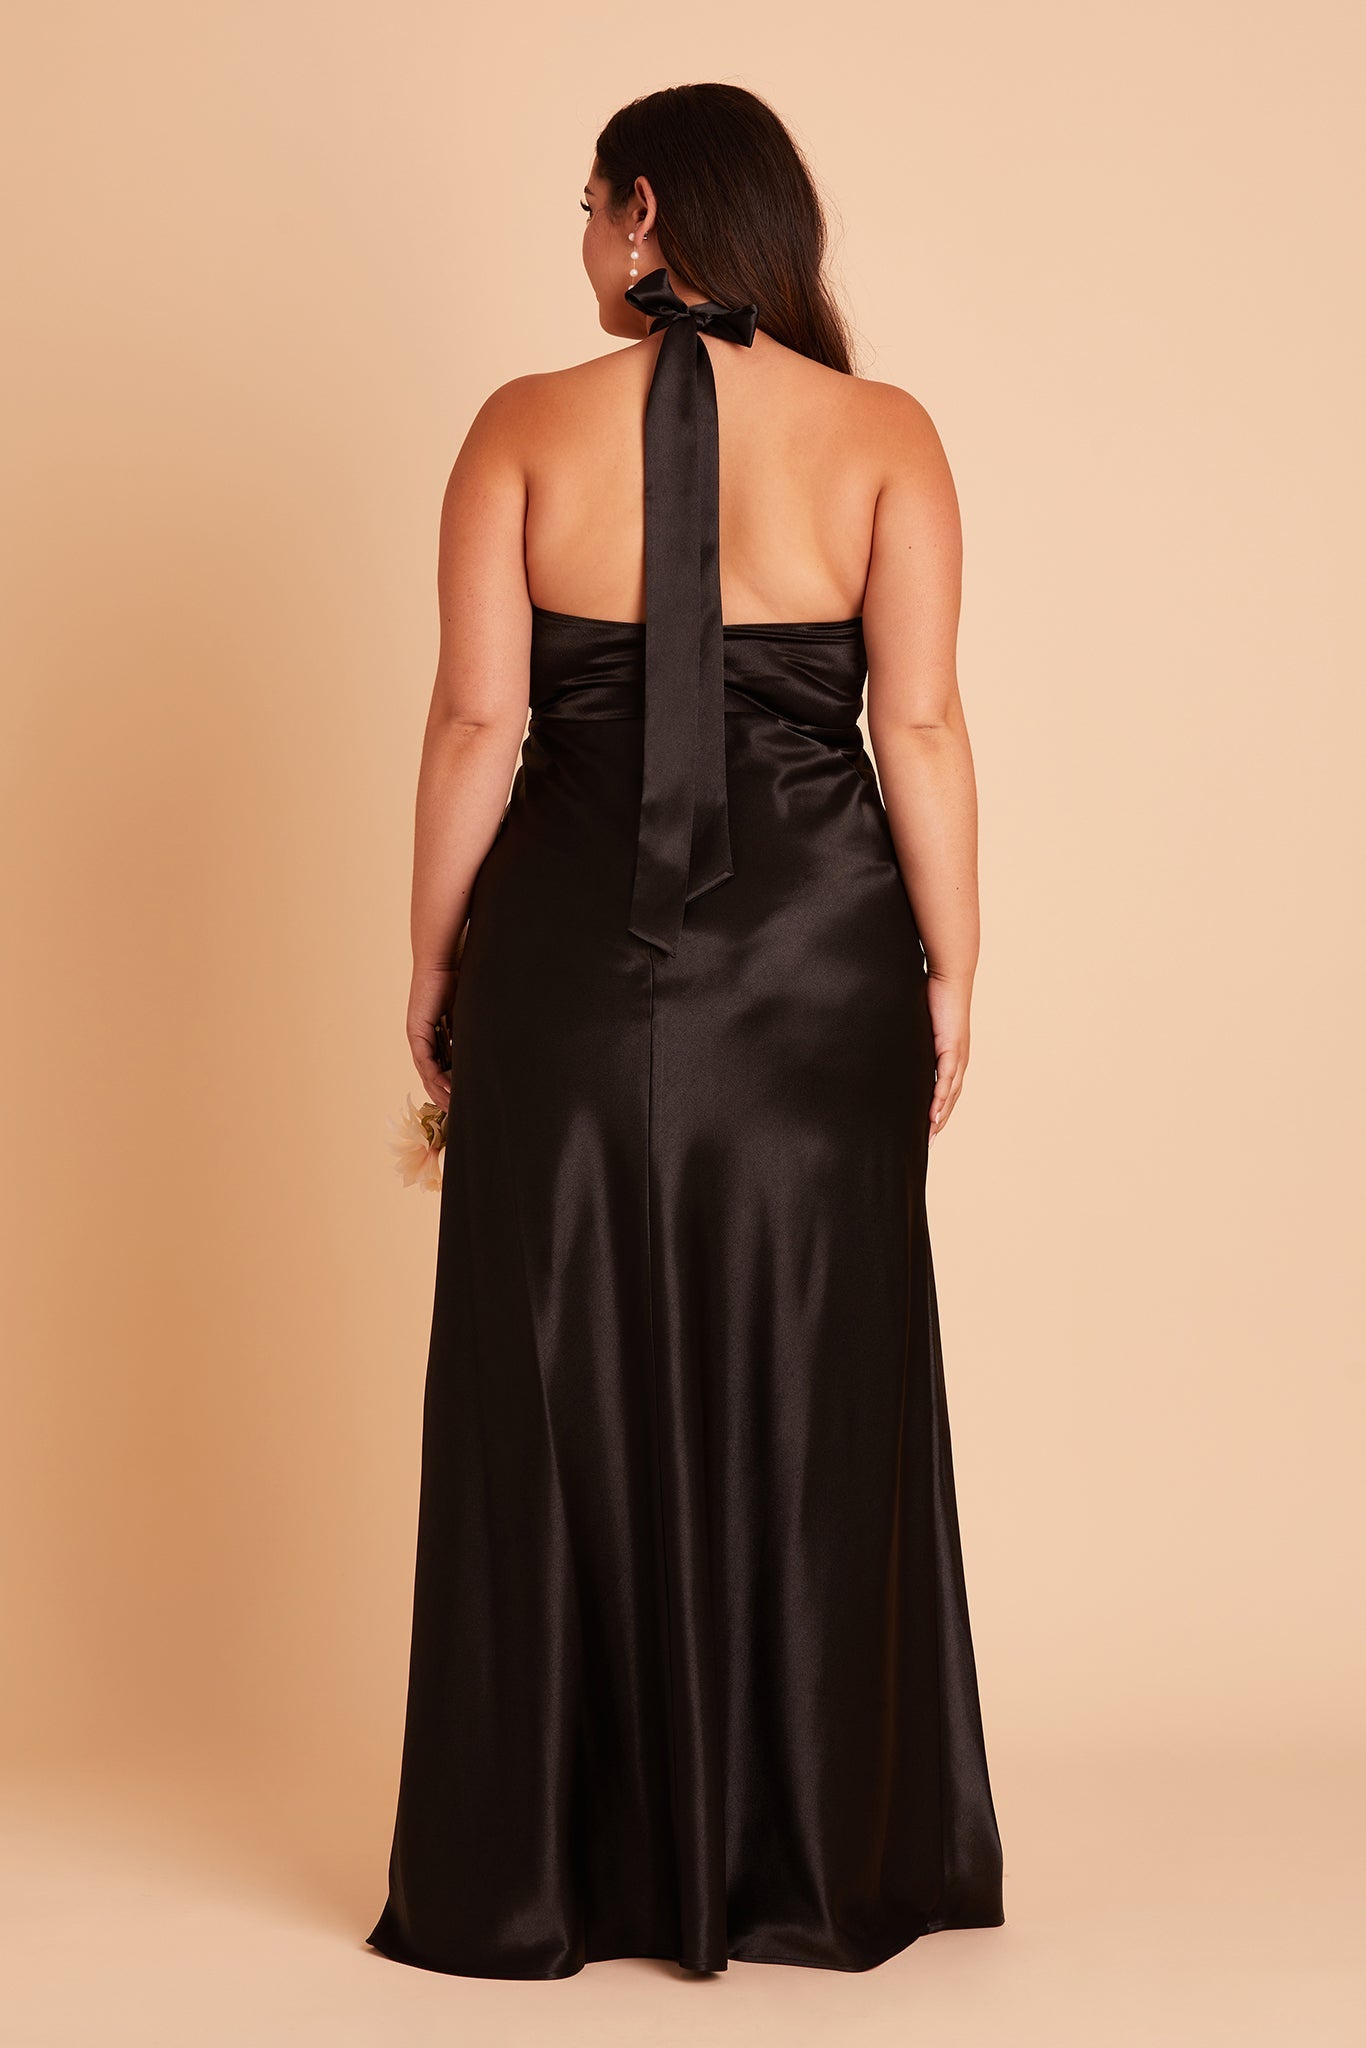 Monica plus size bridesmaid dress with slit in black satin by Birdy Grey, back view